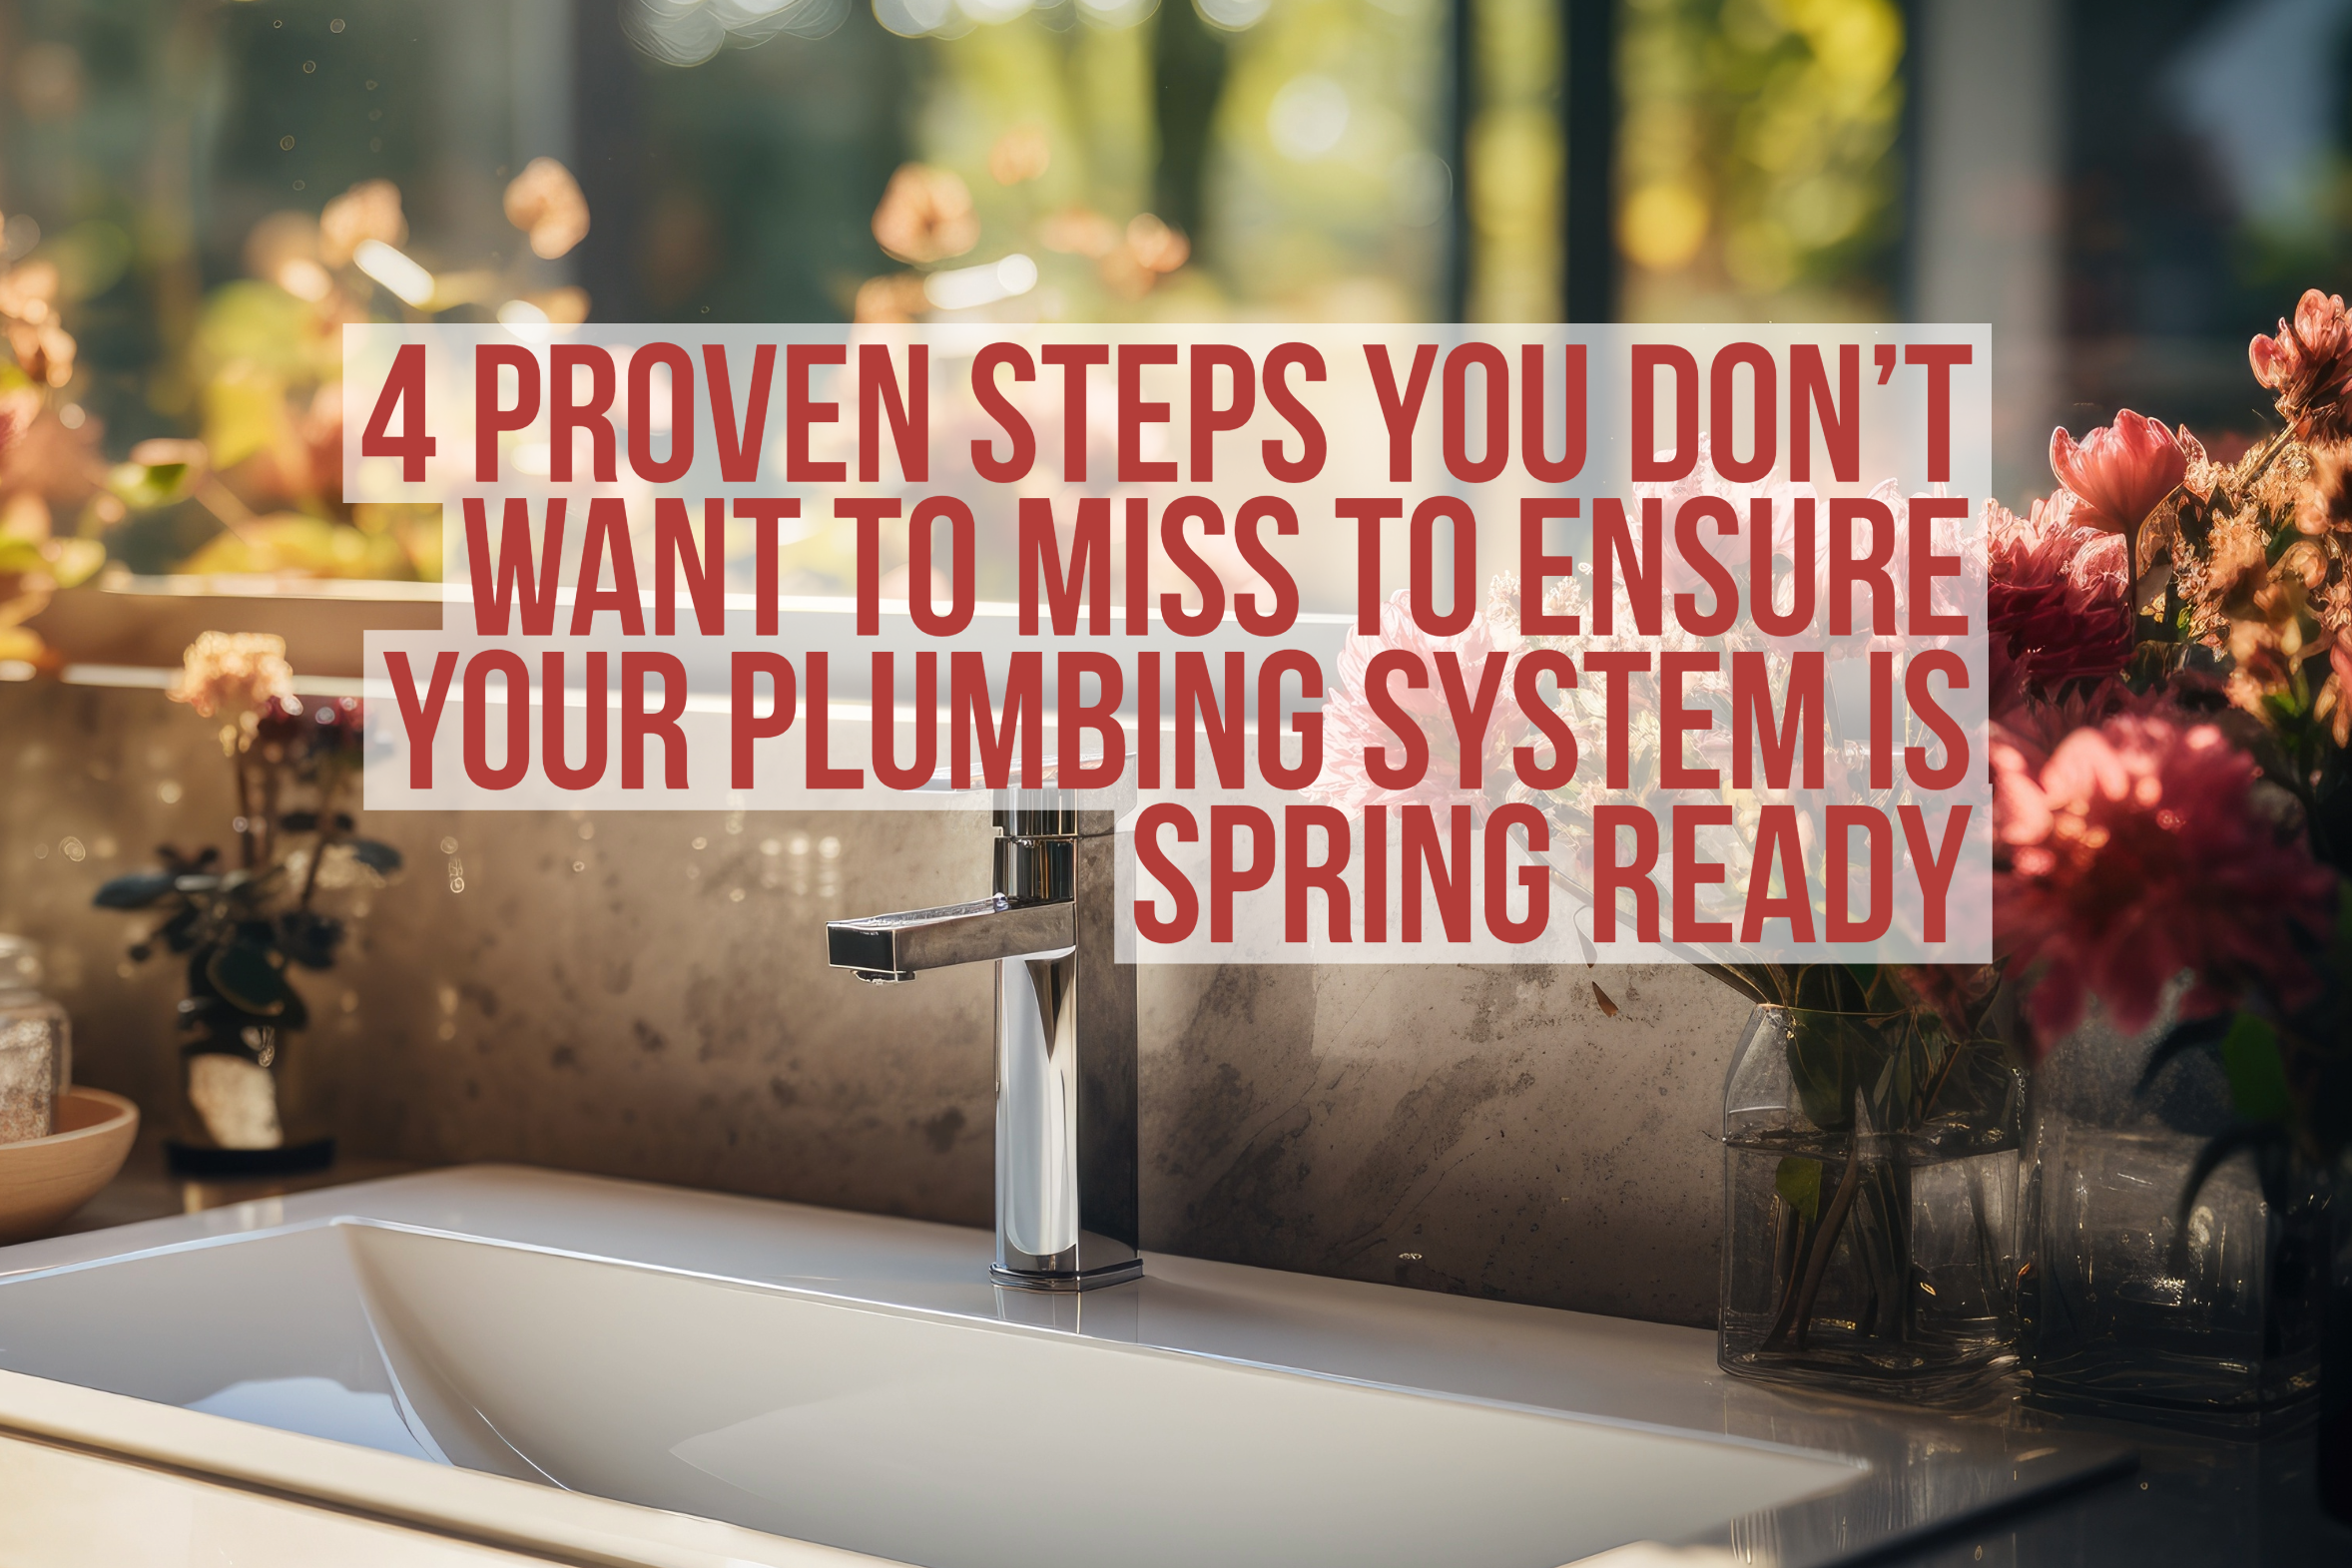 4 Proven Steps You Don’t Want to Miss to Ensure Your Plumbing System Is Spring Ready